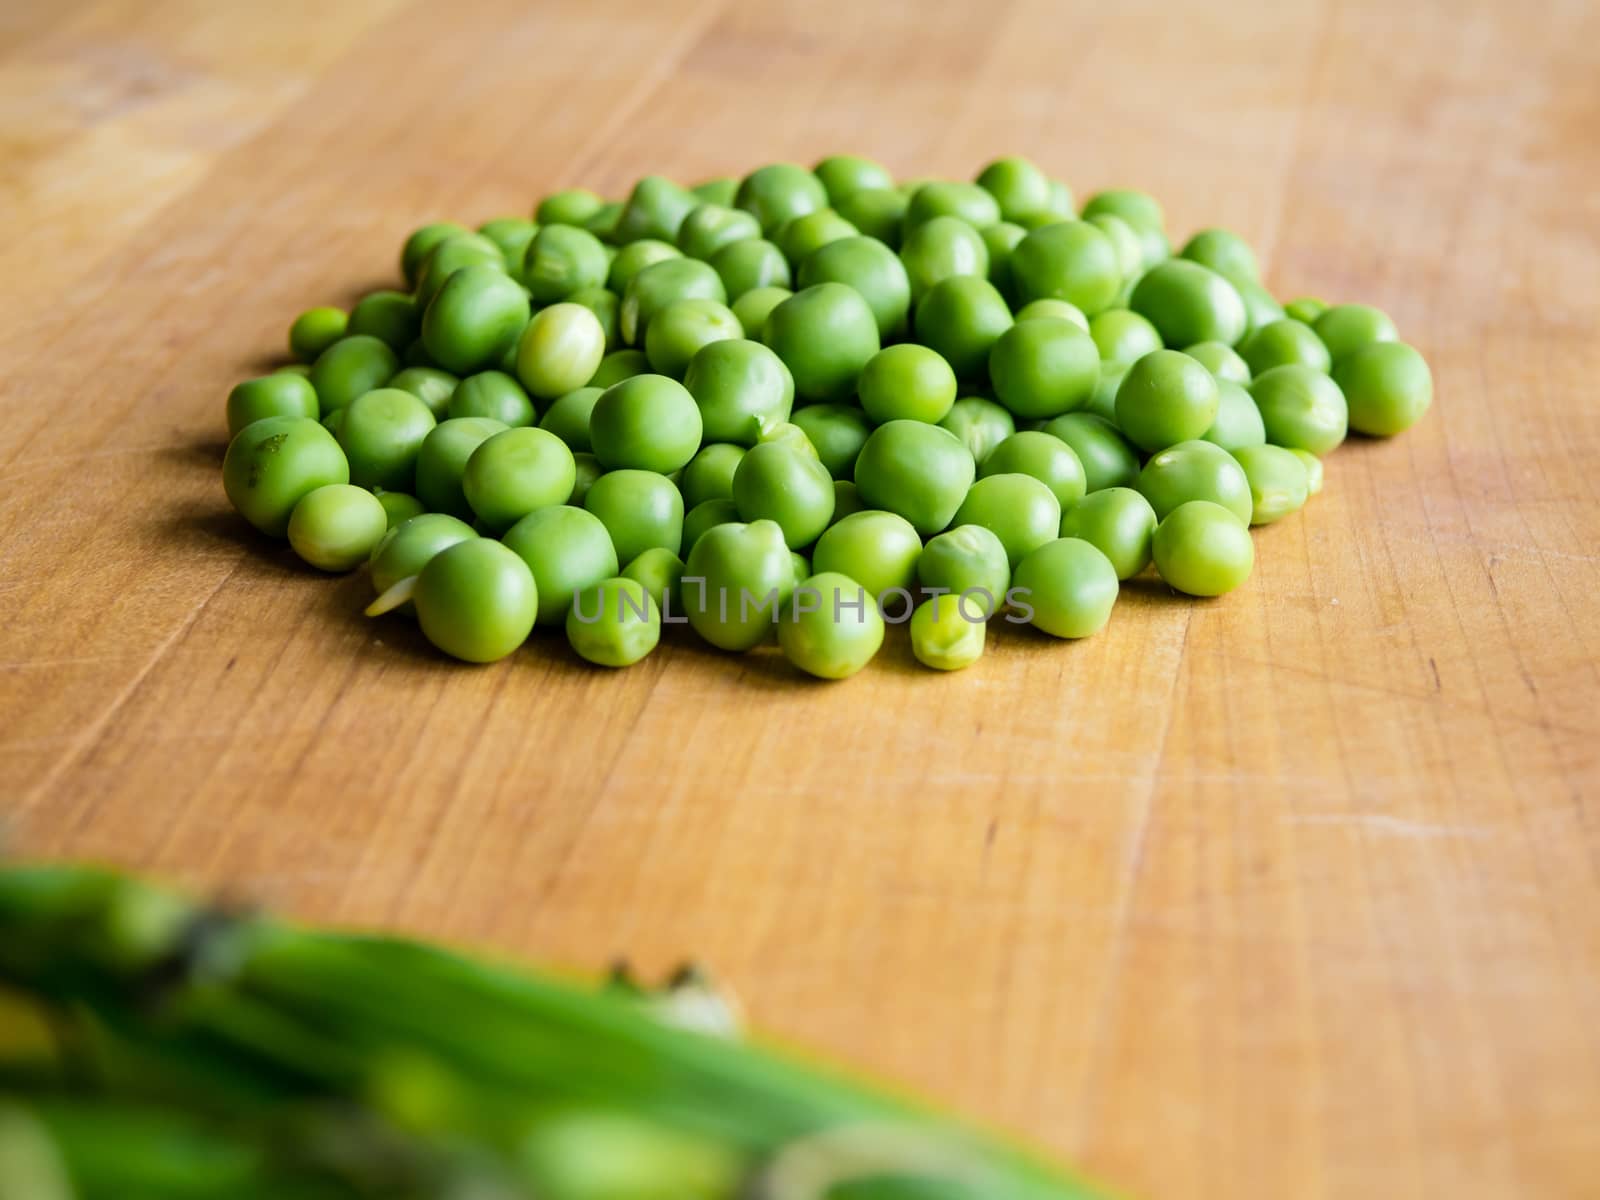 Pile of podded peas on wooden board